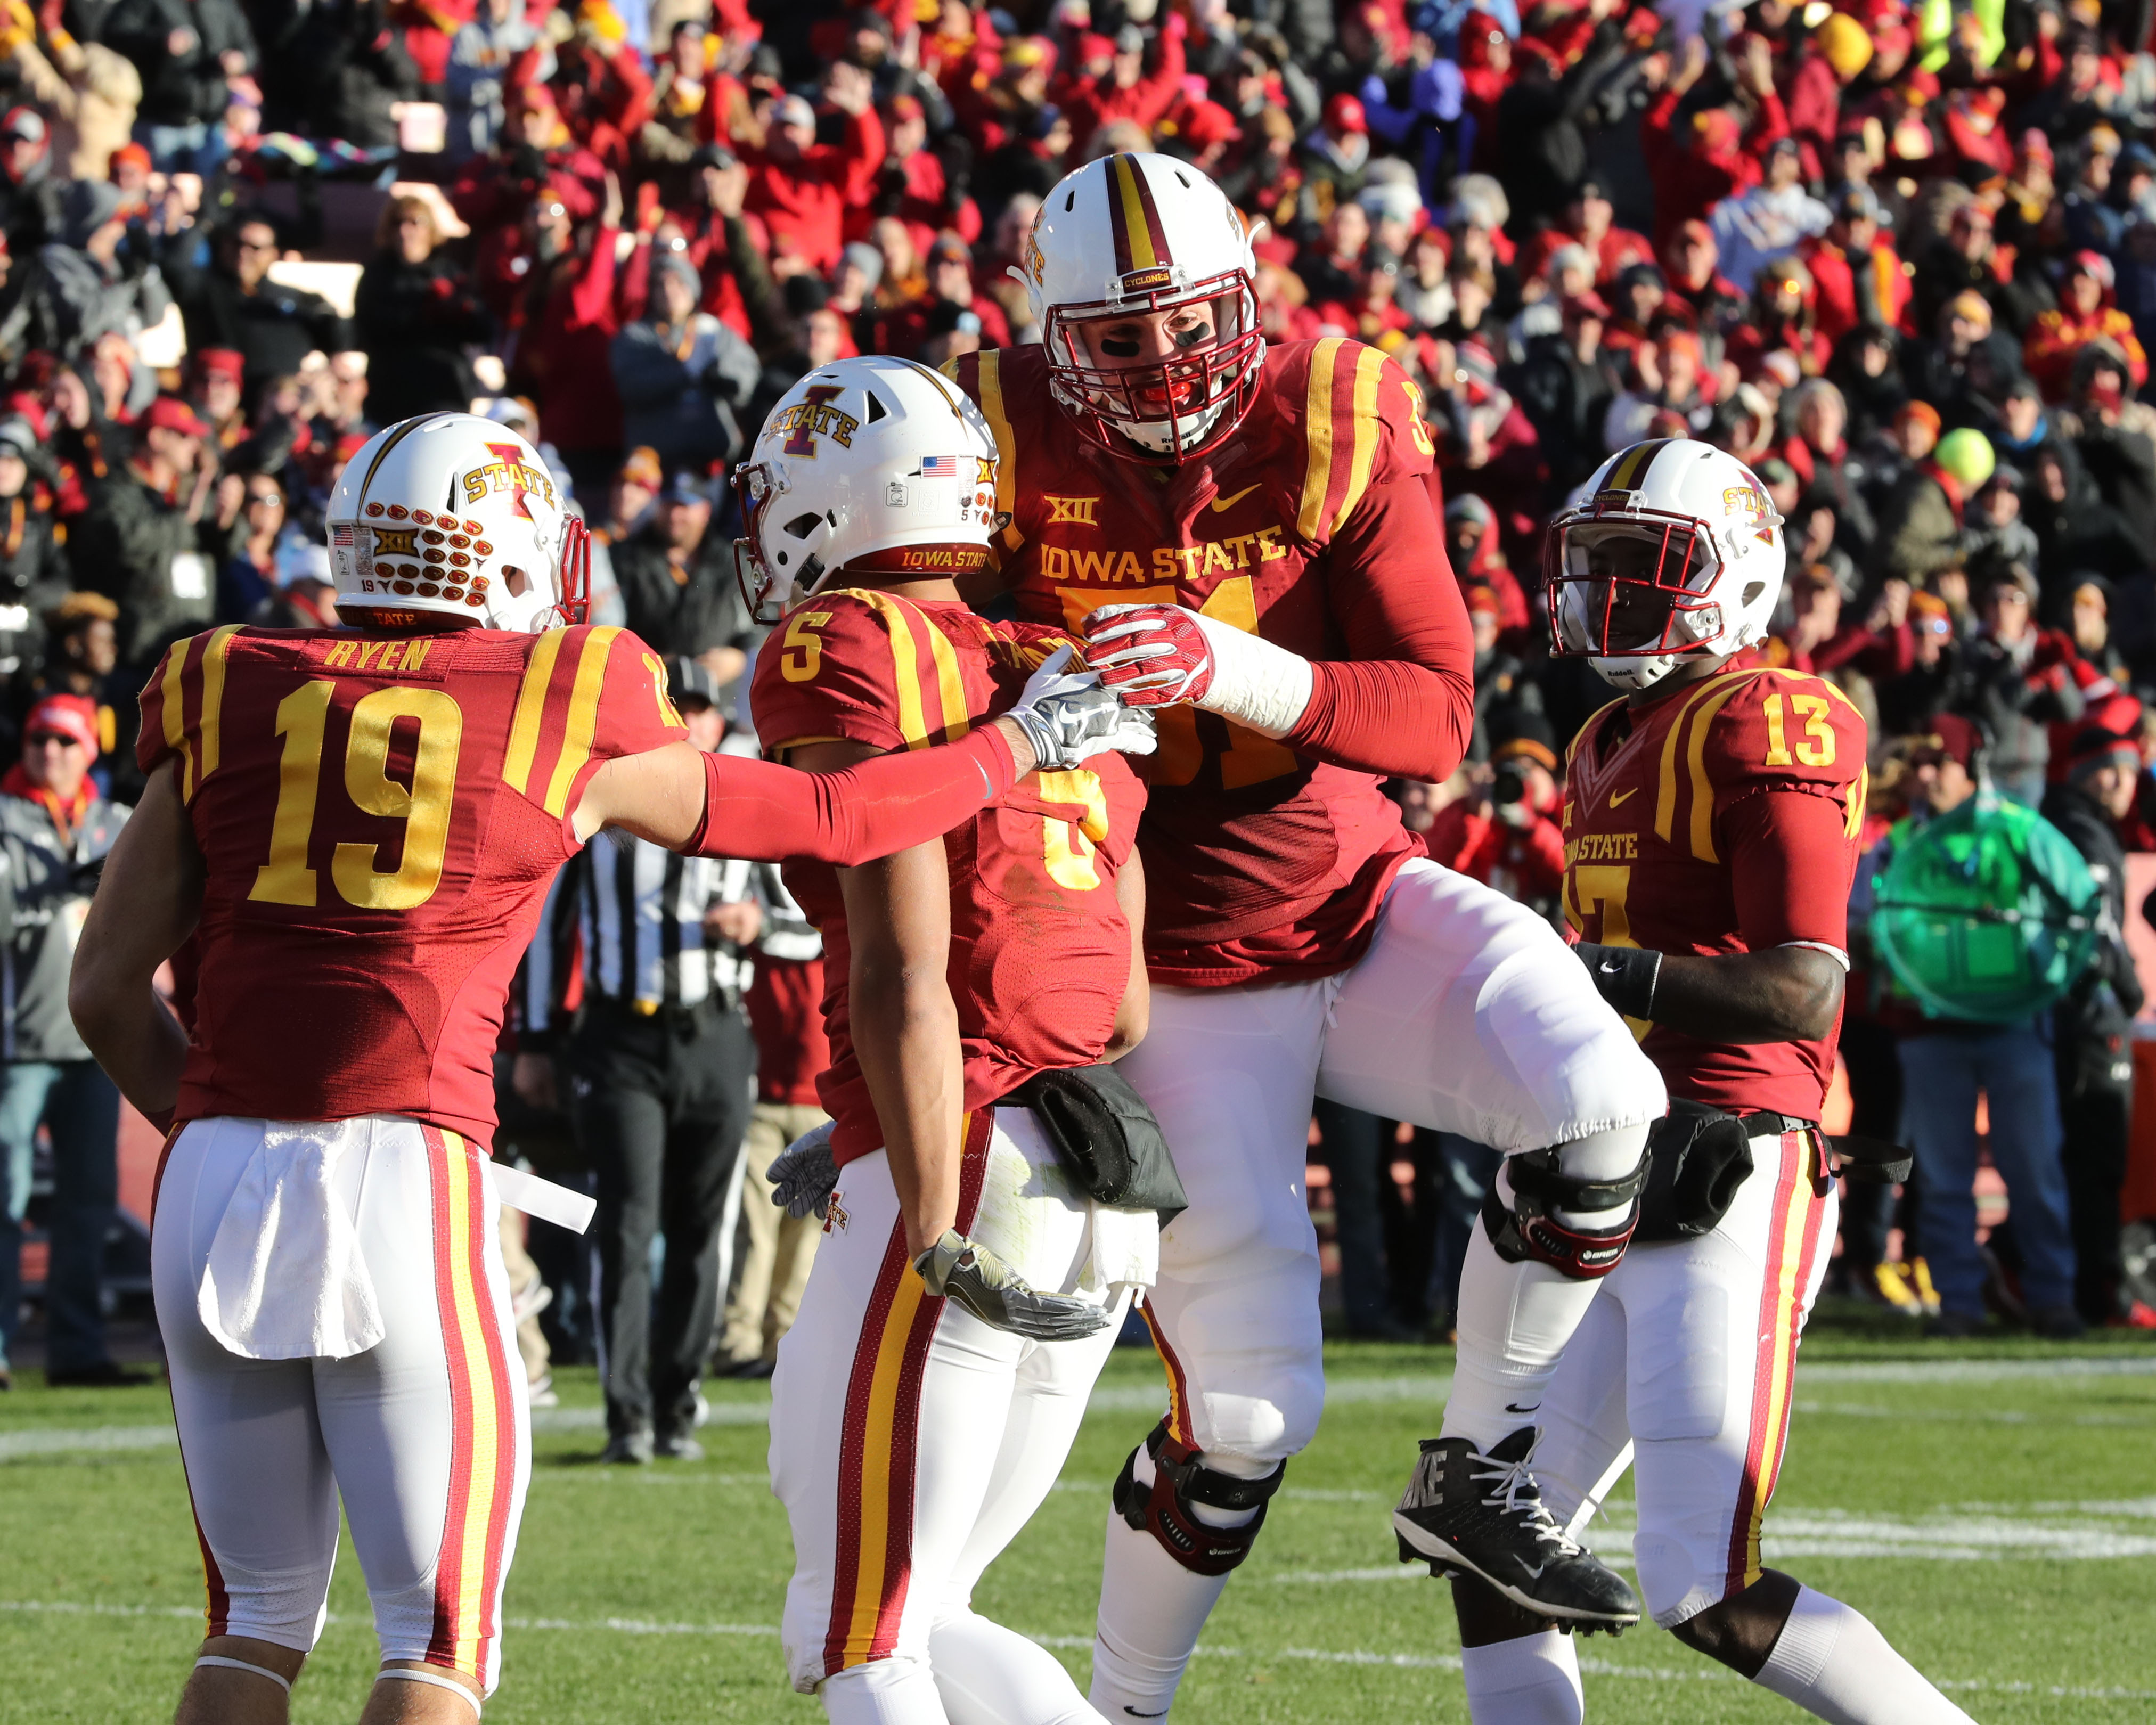 Nov 19, 2016; Ames, IA, USA; Iowa State Cyclones wide receiver Allen Lazard (5) celebrates with Iowa State Cyclones offensive lineman Julian Good-Jones (51) and Iowa State Cyclones wide receiver Trever Ryen (19) after scoring against the Texas Tech Red Raiders at Jack Trice Stadium. Mandatory Credit: Reese Strickland-USA TODAY Sports